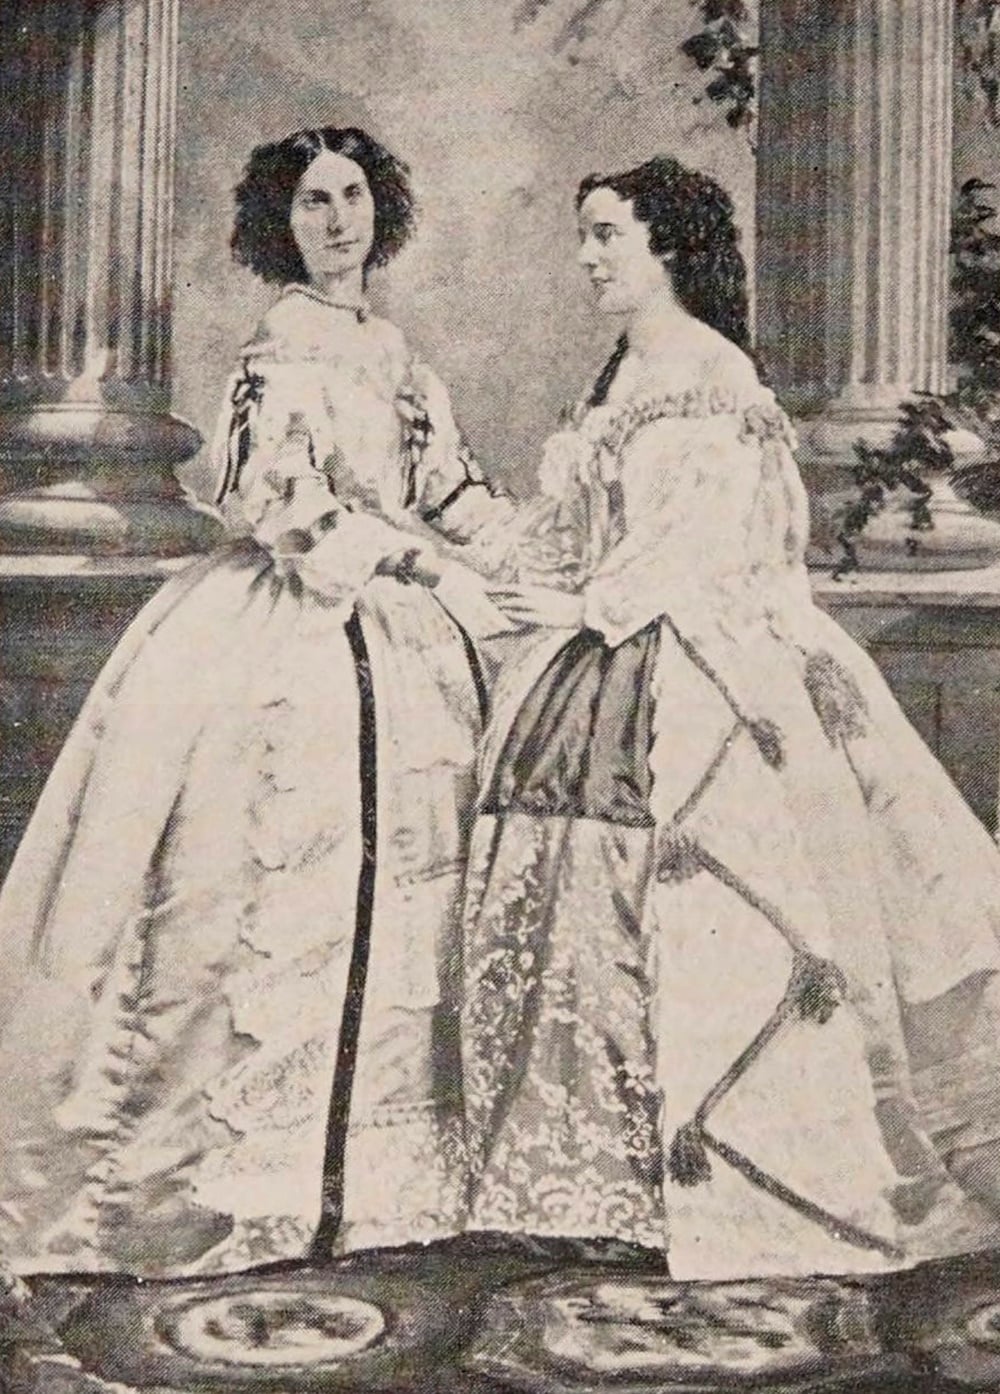 The Gougenheim sisters, c. 1860